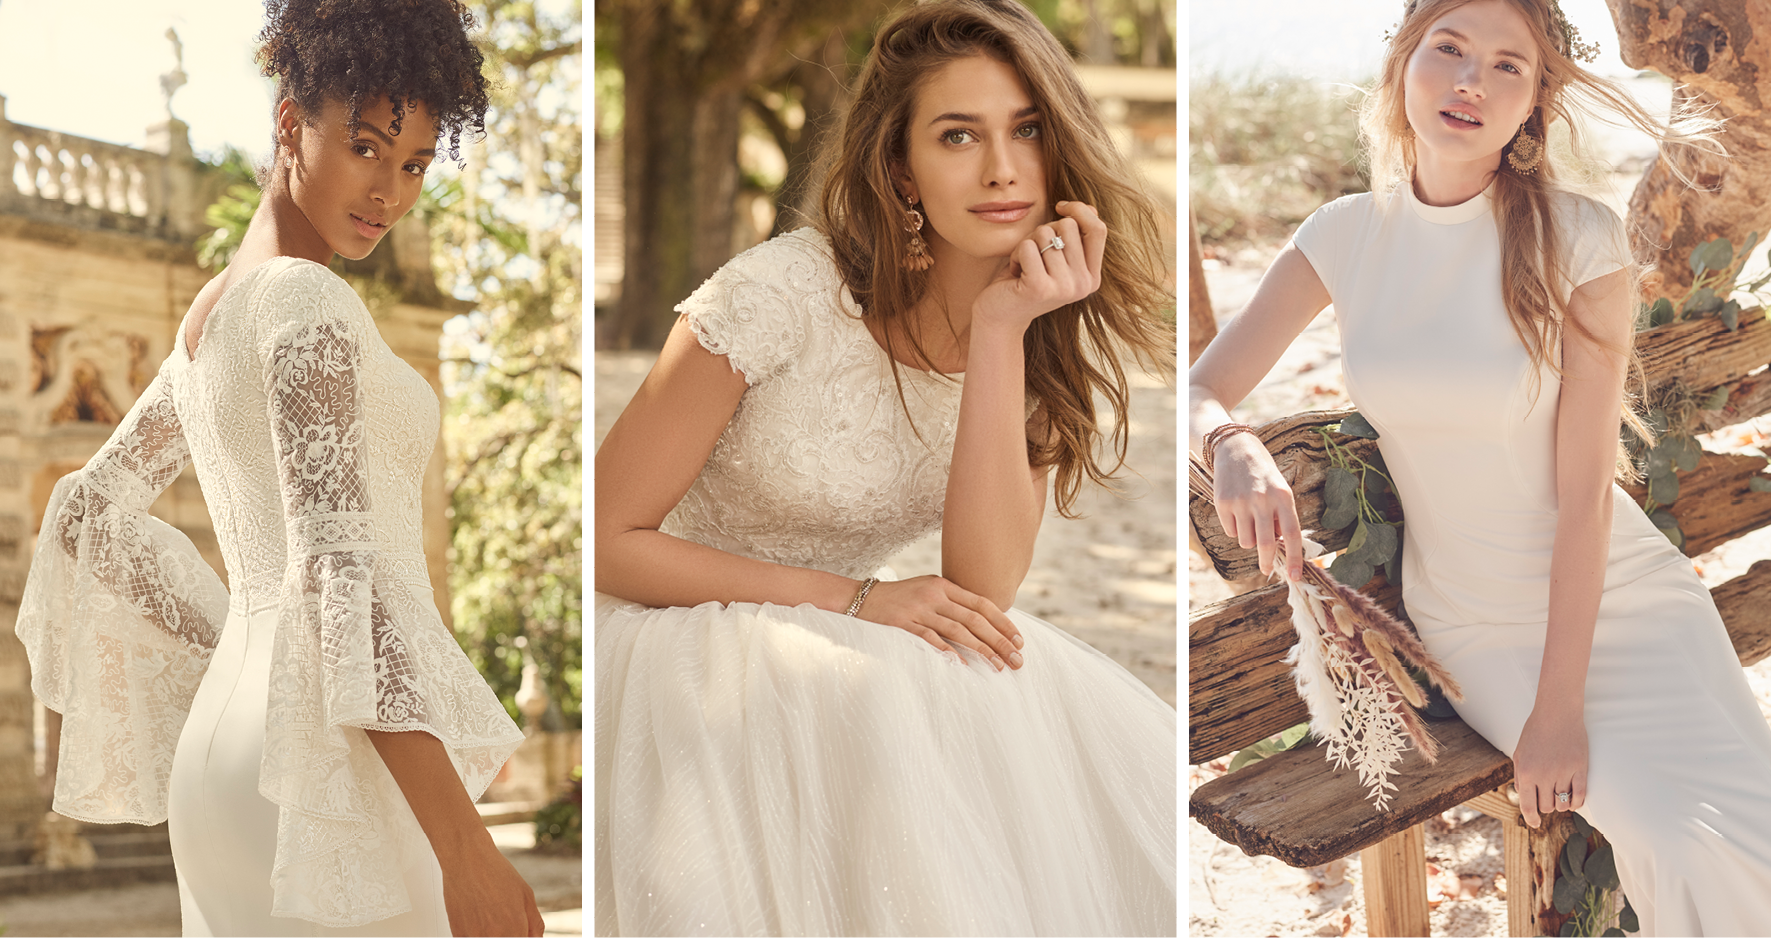 Collage of Three Brides Wearing Romantic Modest Wedding Dresses by Maggie Sottero